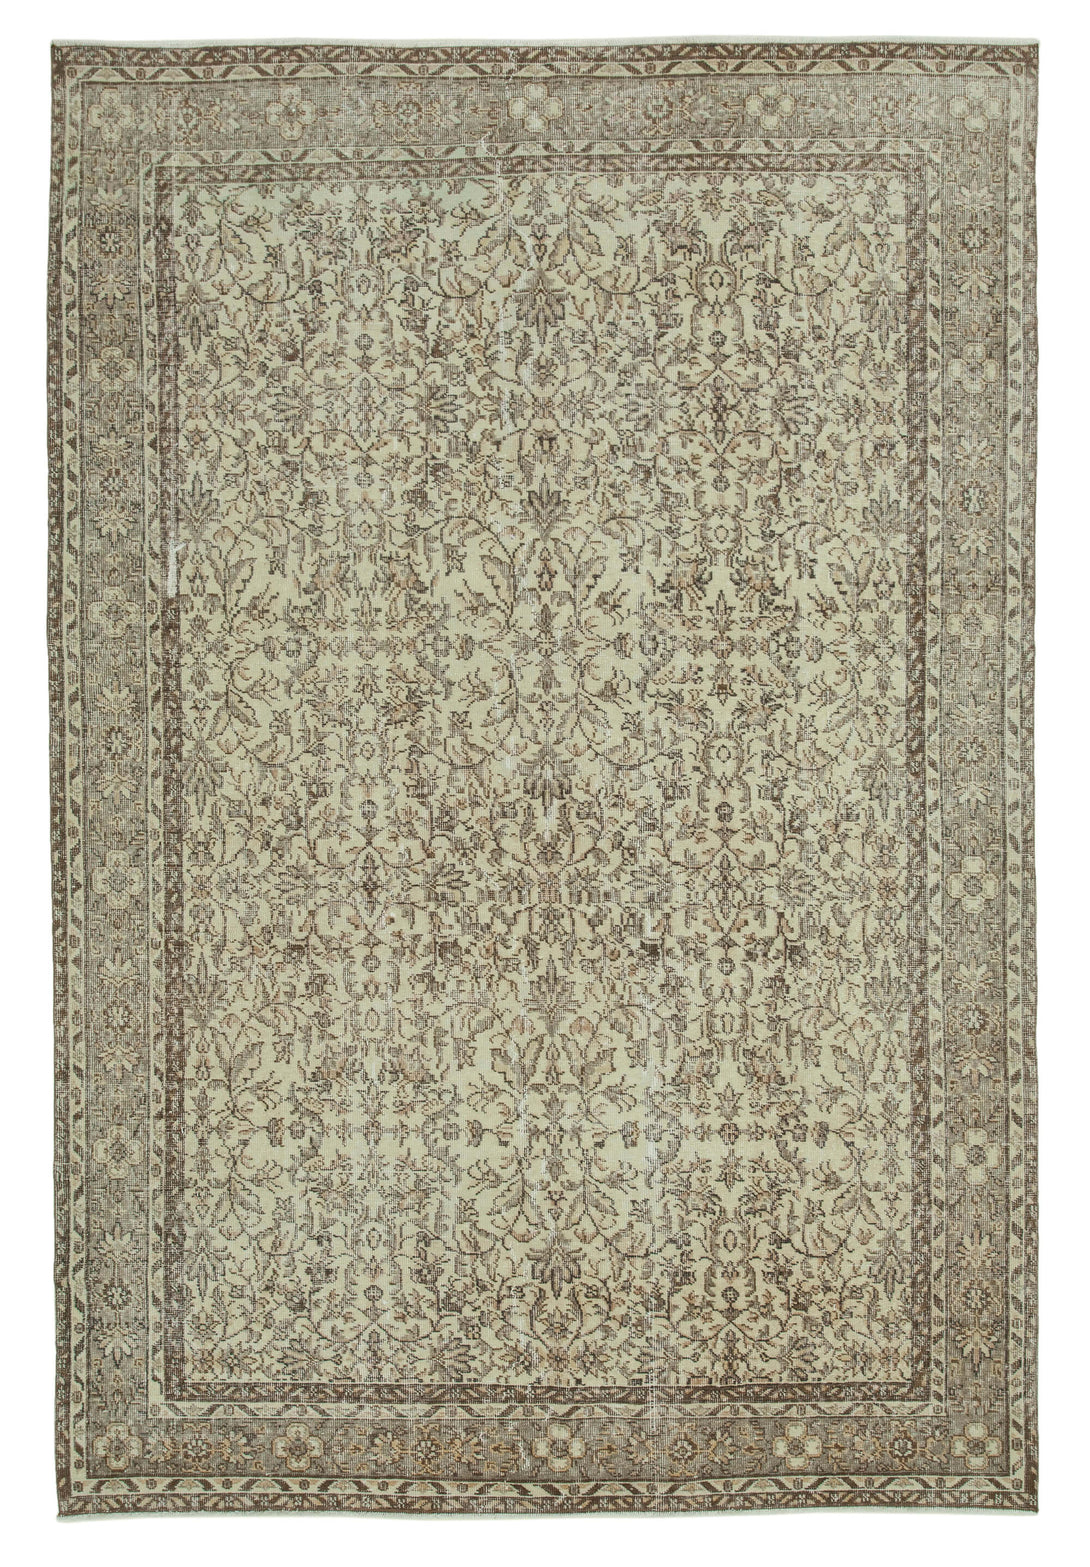 Handmade White Wash Area Rug > Design# OL-AC-36612 > Size: 6'-9" x 10'-0", Carpet Culture Rugs, Handmade Rugs, NYC Rugs, New Rugs, Shop Rugs, Rug Store, Outlet Rugs, SoHo Rugs, Rugs in USA